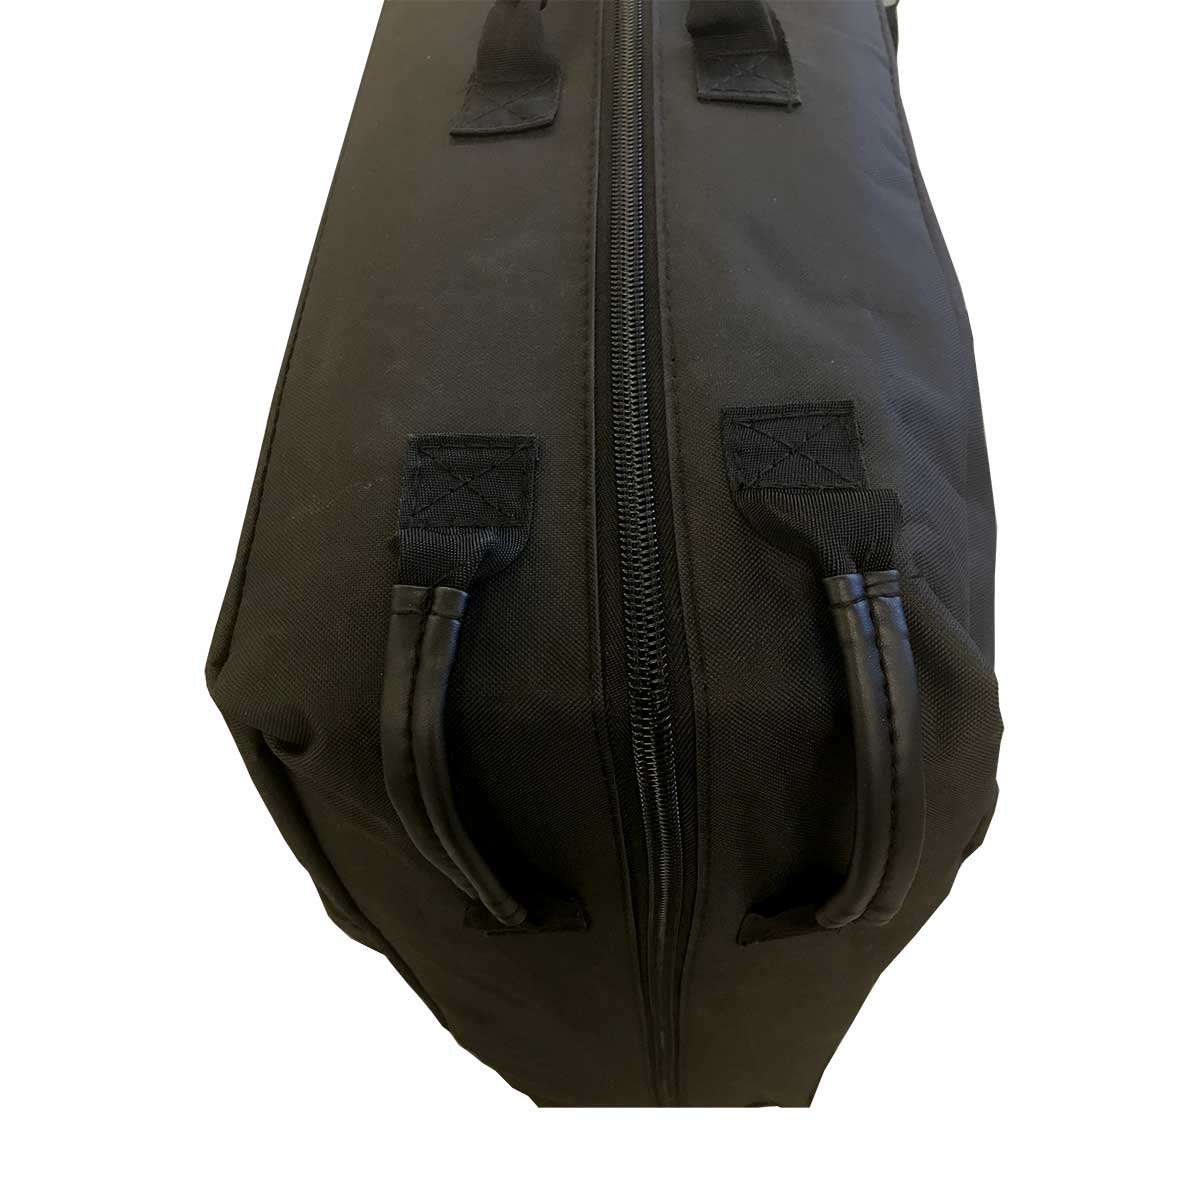 Massage Table Carry Case 30"